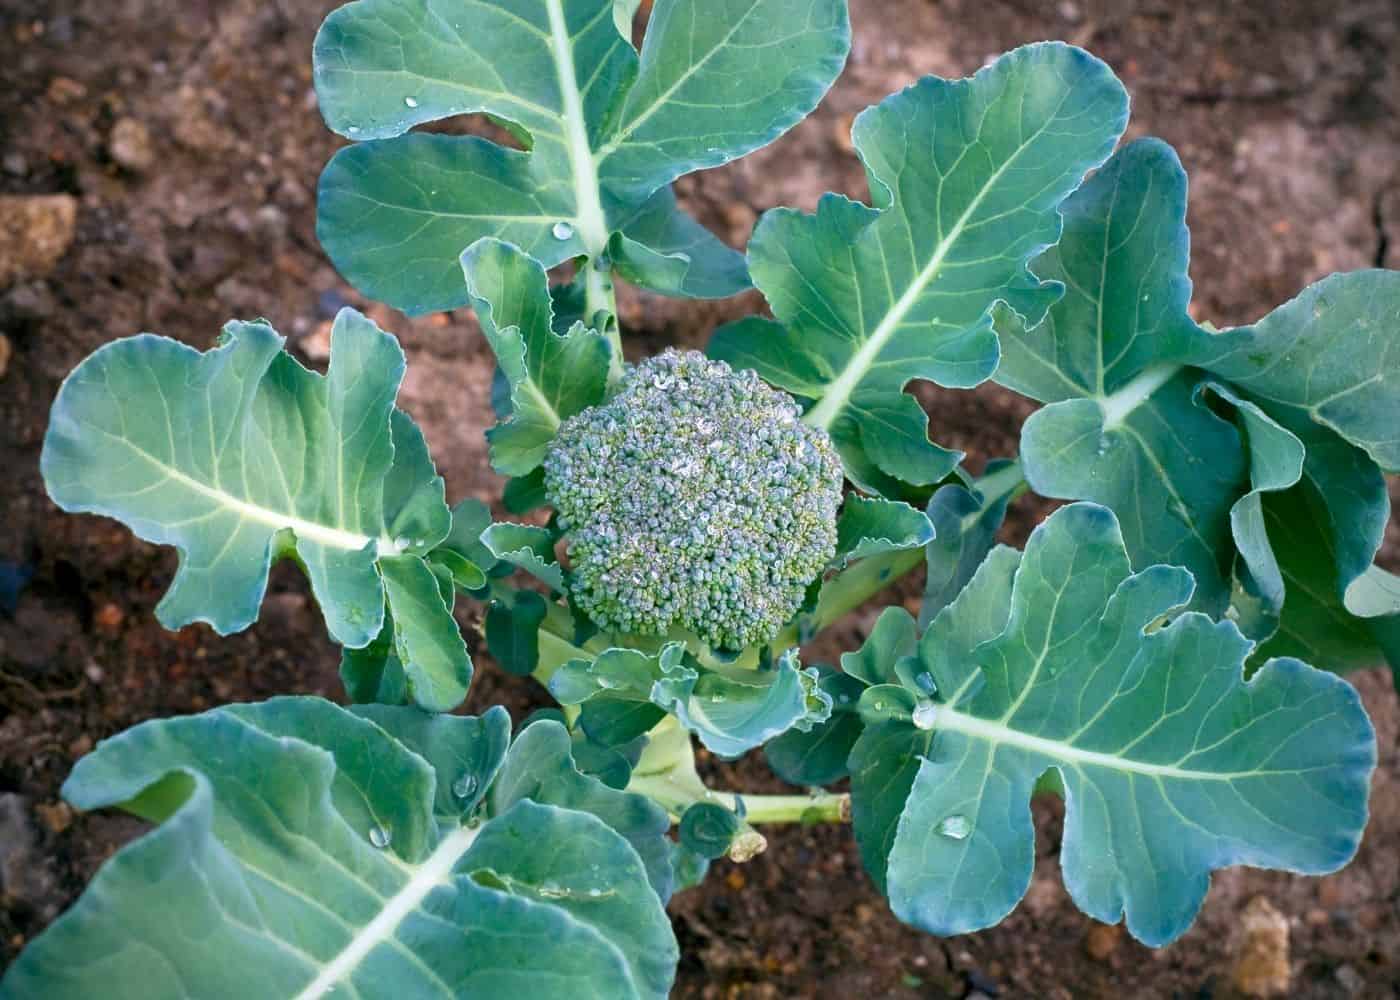 Broccoli and other bad companion plants for tomatoes